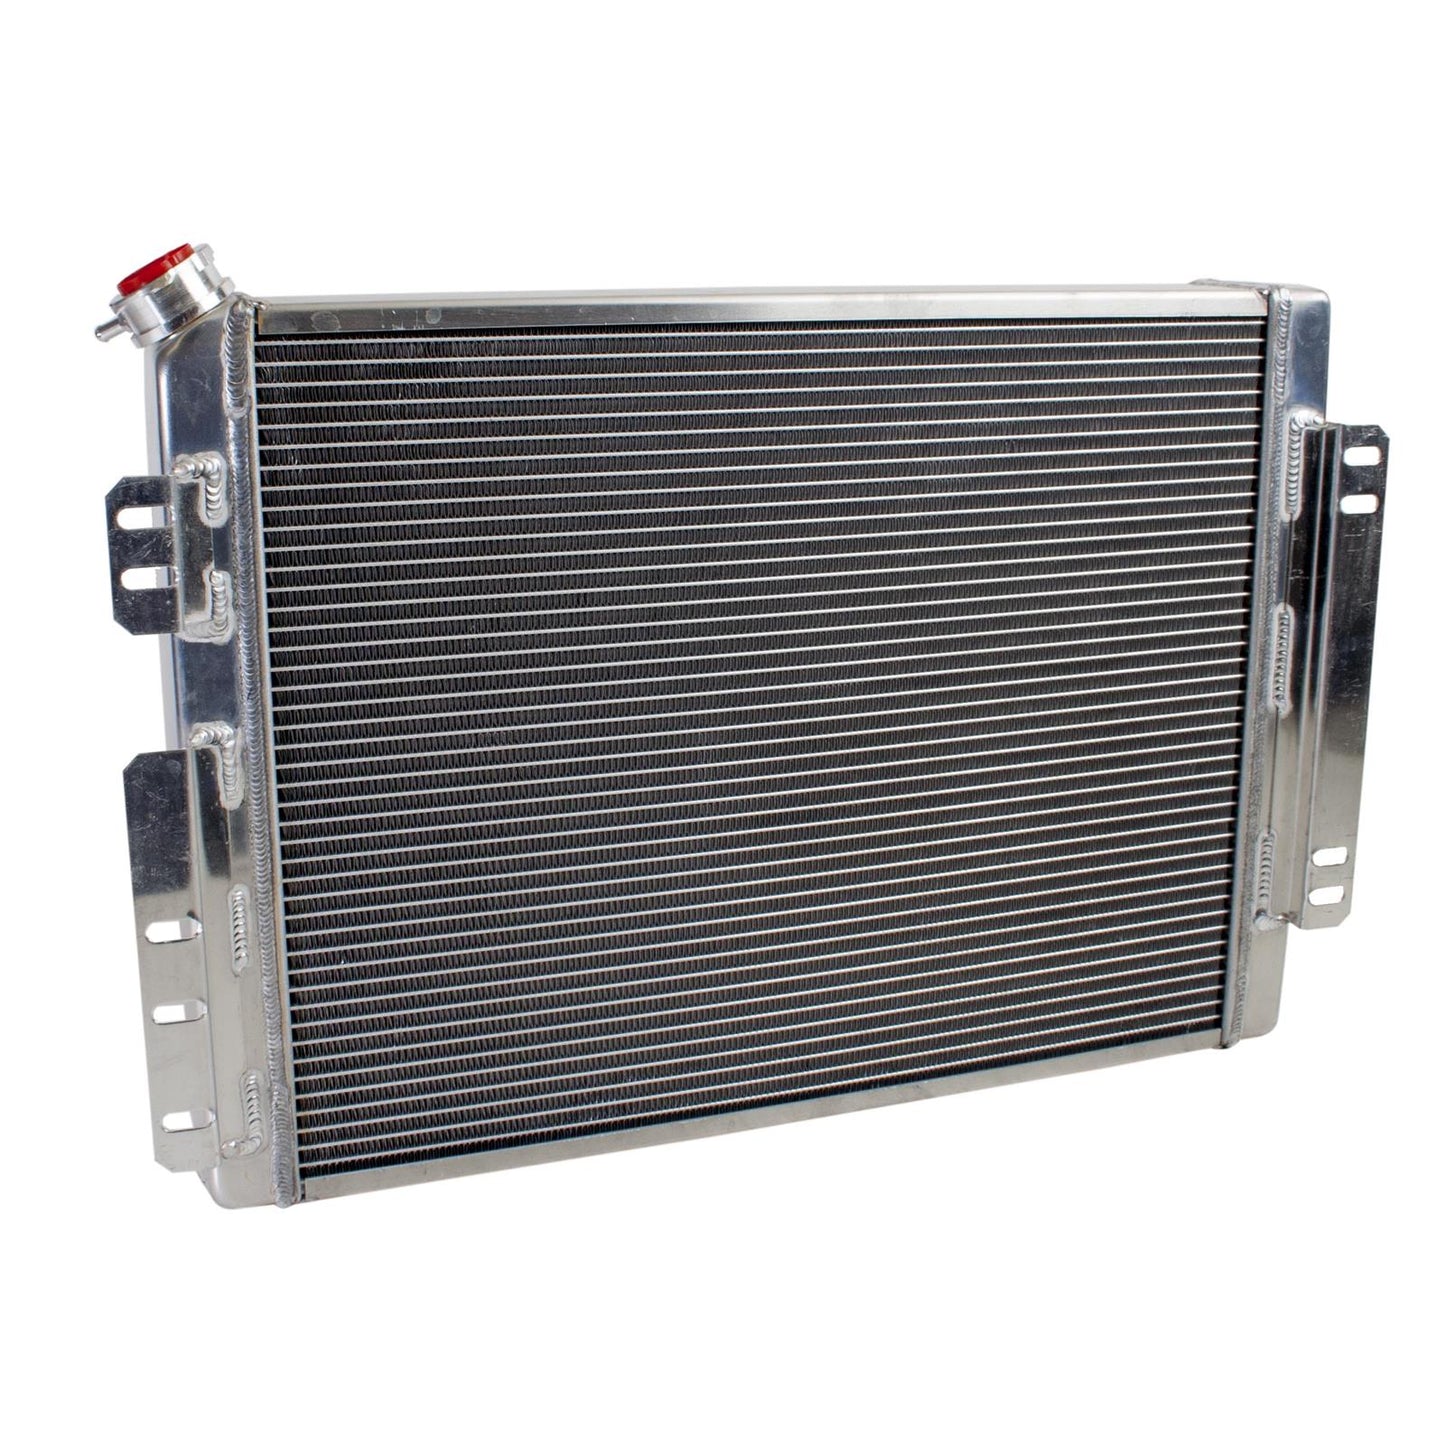 Griffin Performance Fit Radiator Combos CU-00009 for 1964-1969 Chevrolet, Pontiac Cars & Trucks